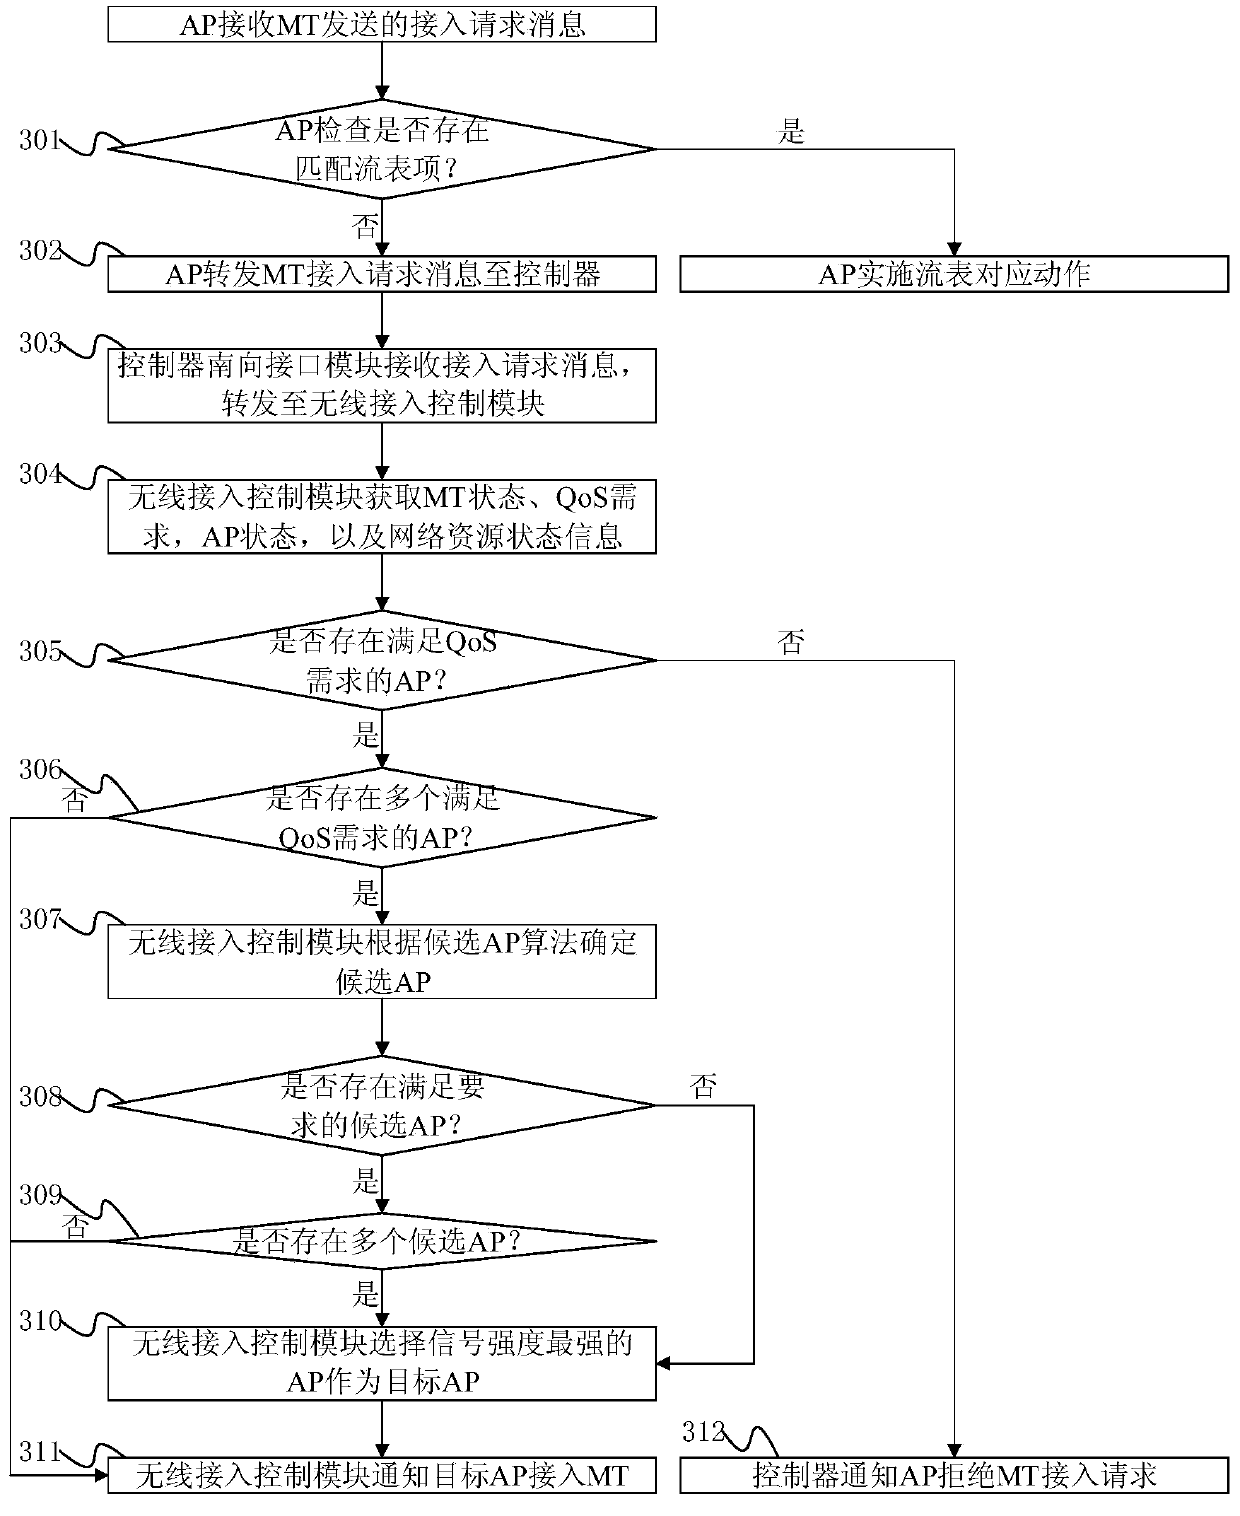 Wireless access control method and device for software defined network (SDN)